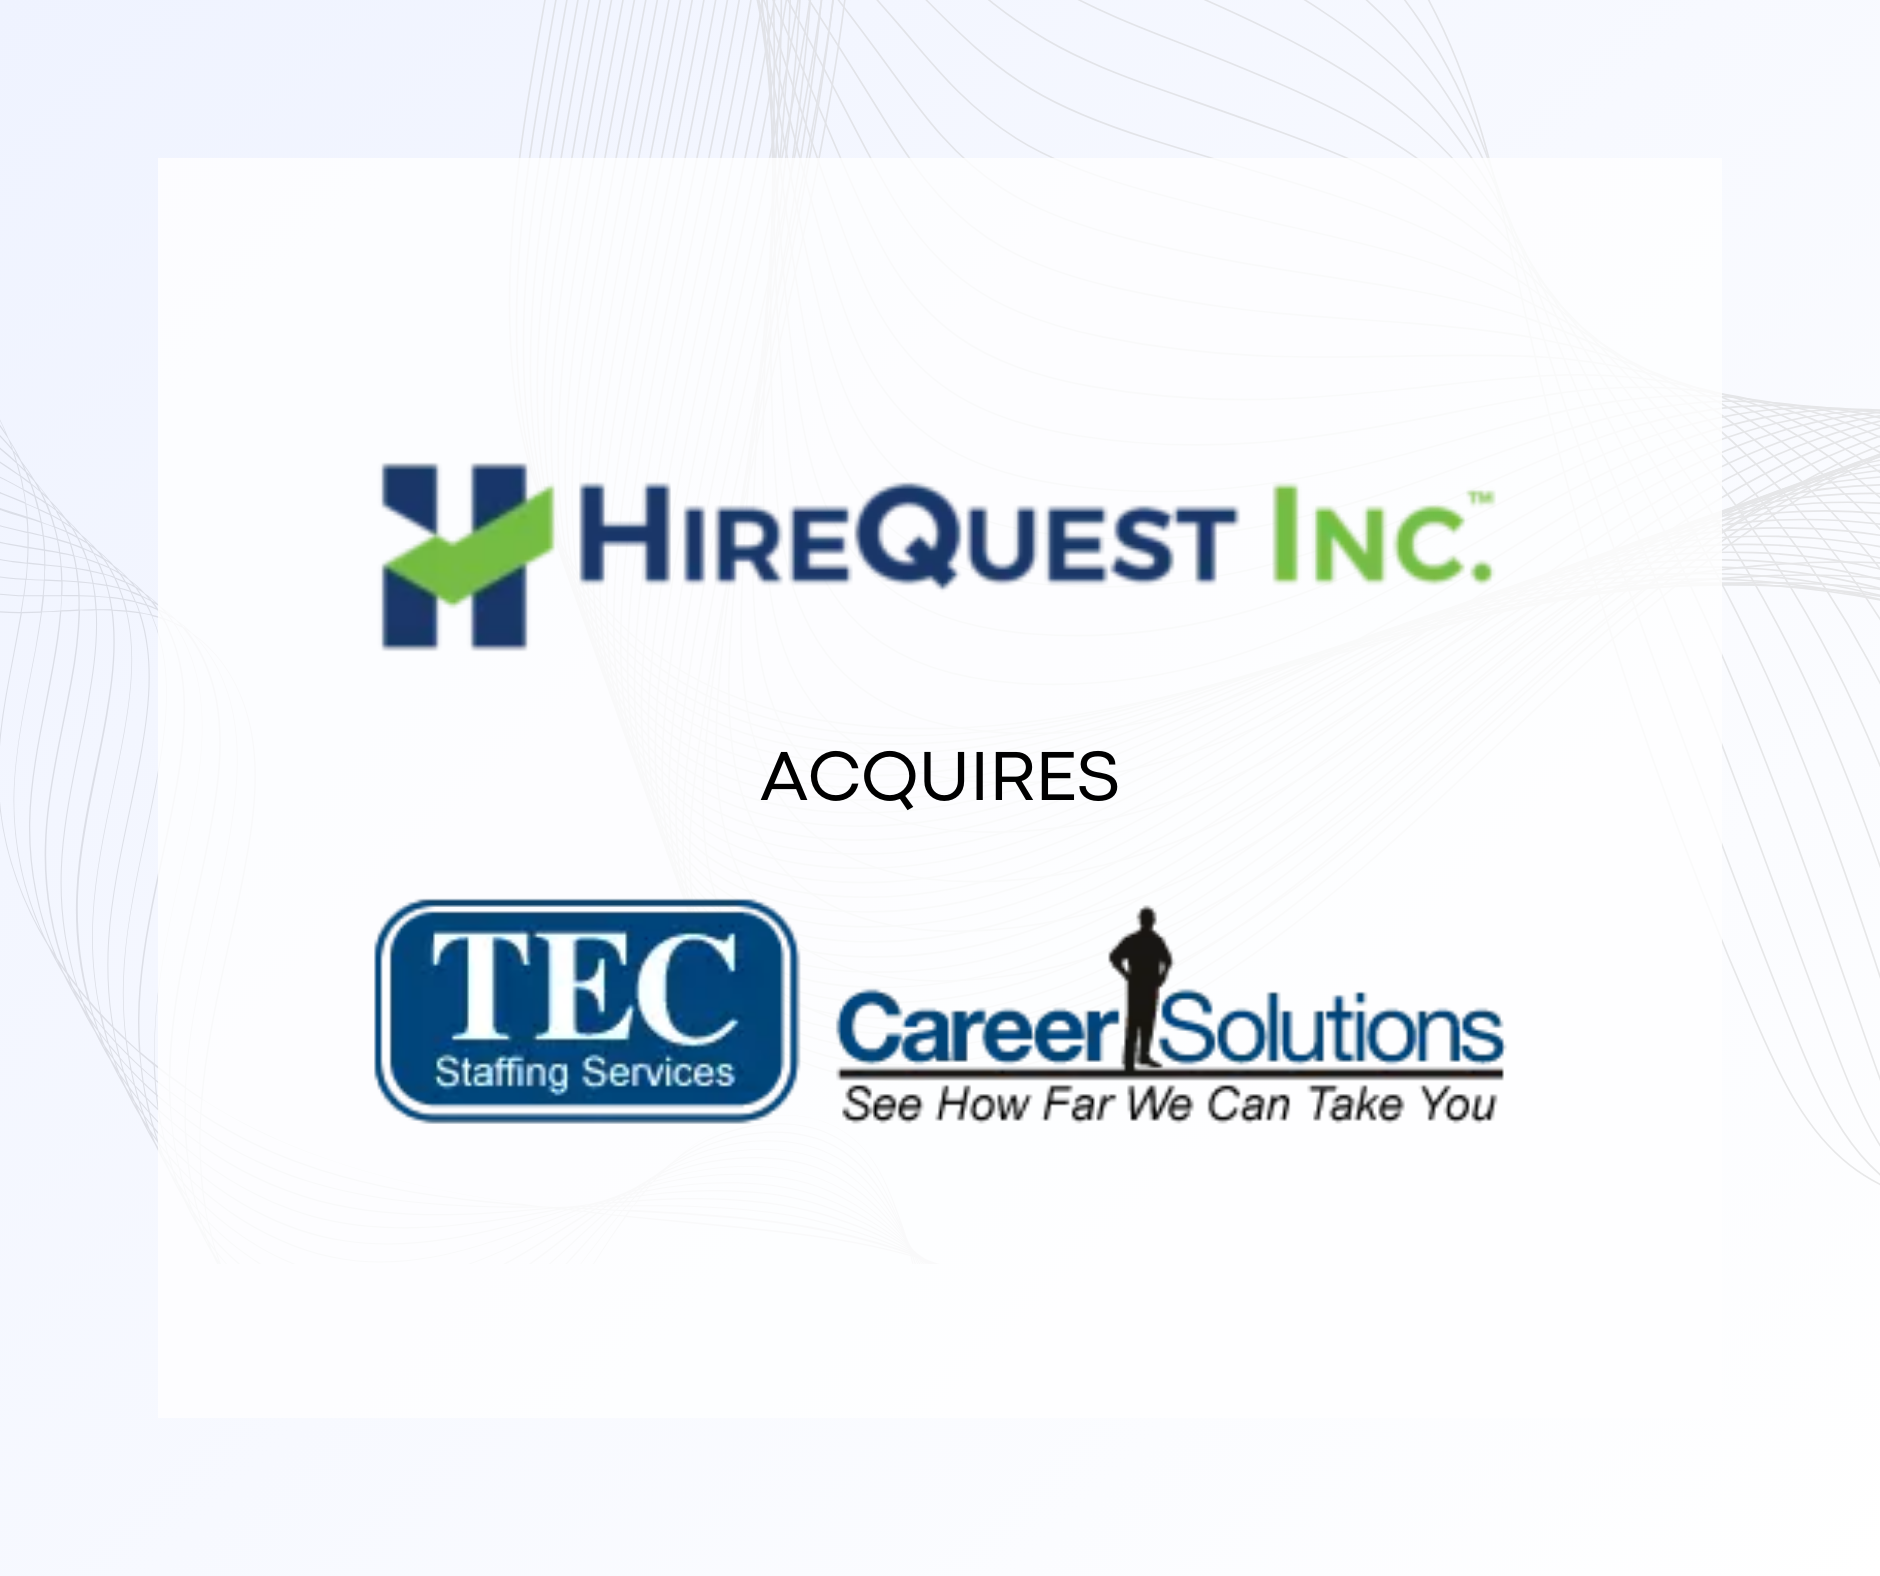 You are currently viewing HireQuest, Inc. Acquires TEC Staffing Services 